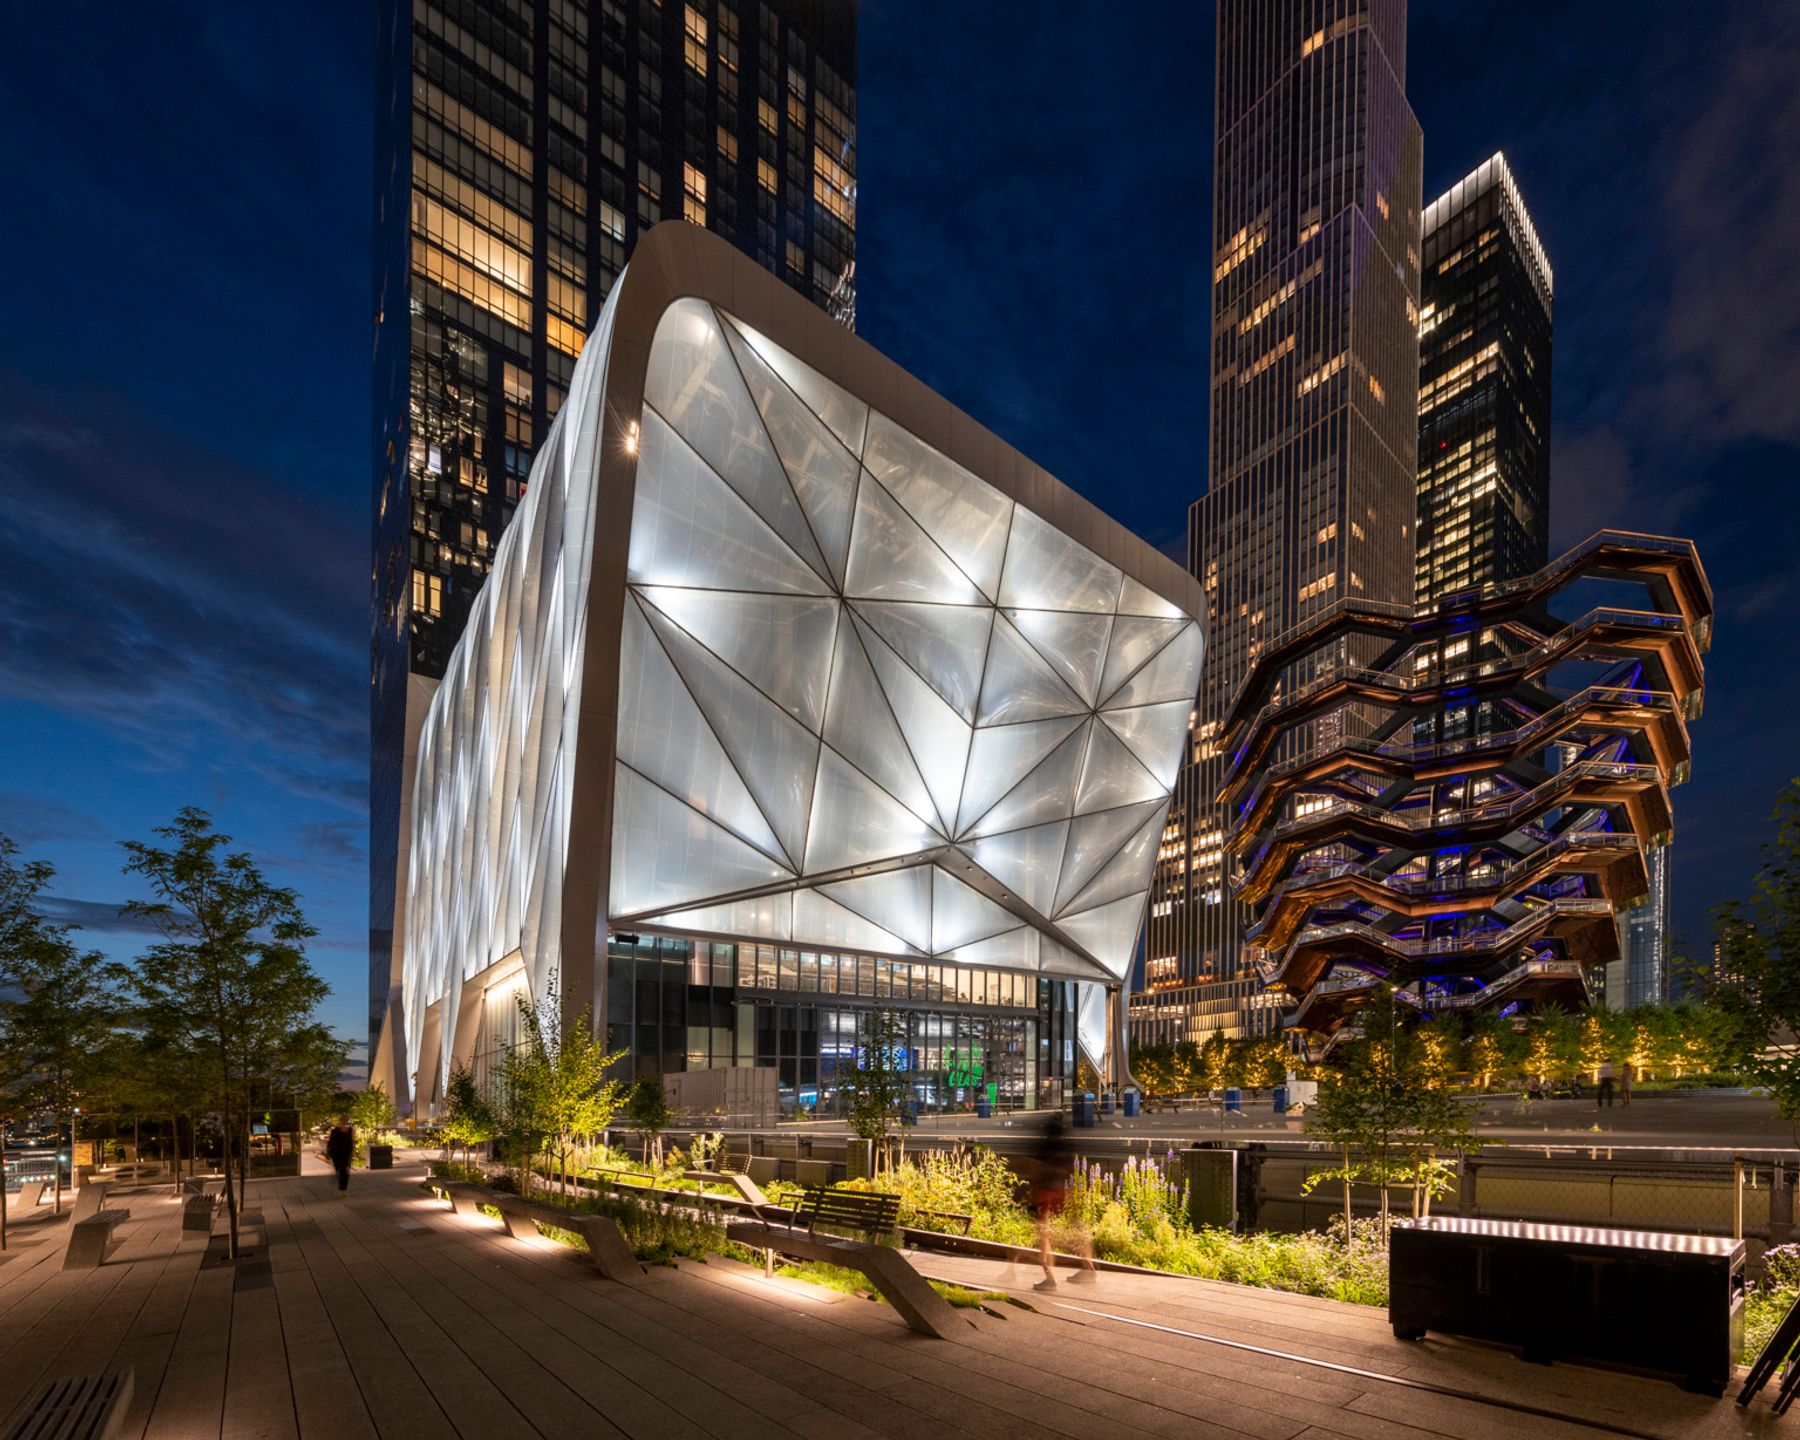 The Shed/Hudson Yards, New York. Architecture: Diller Scofidio + Renfro, New York (lead architects), Rockwell Group, New York (collaborating architects). Lighting design: Tillotson Design Associates, New York. Photography: Timothy Schenk, New York